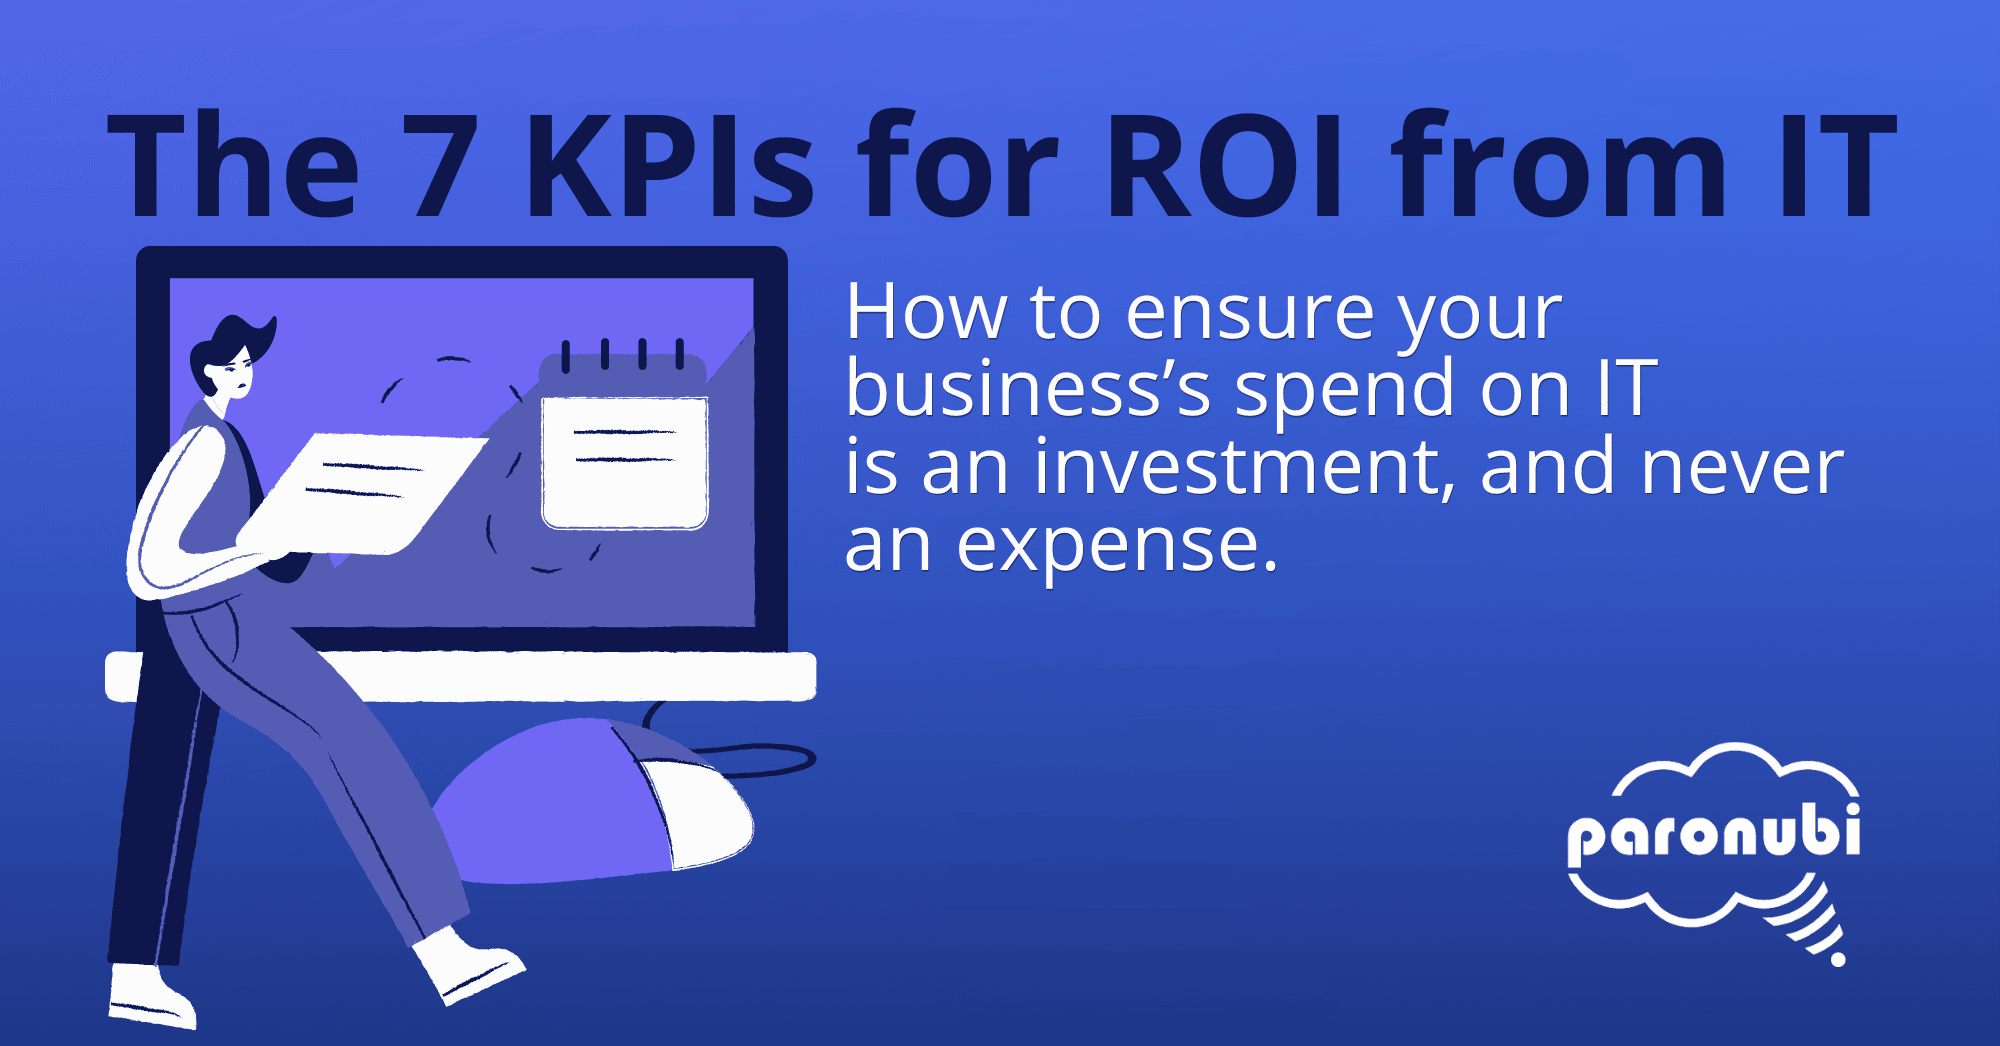 drawing of a person and computer + words: The 7 KPIs for ROI from IT - How to ensure your business's spend on IT is an investment, and never an expense